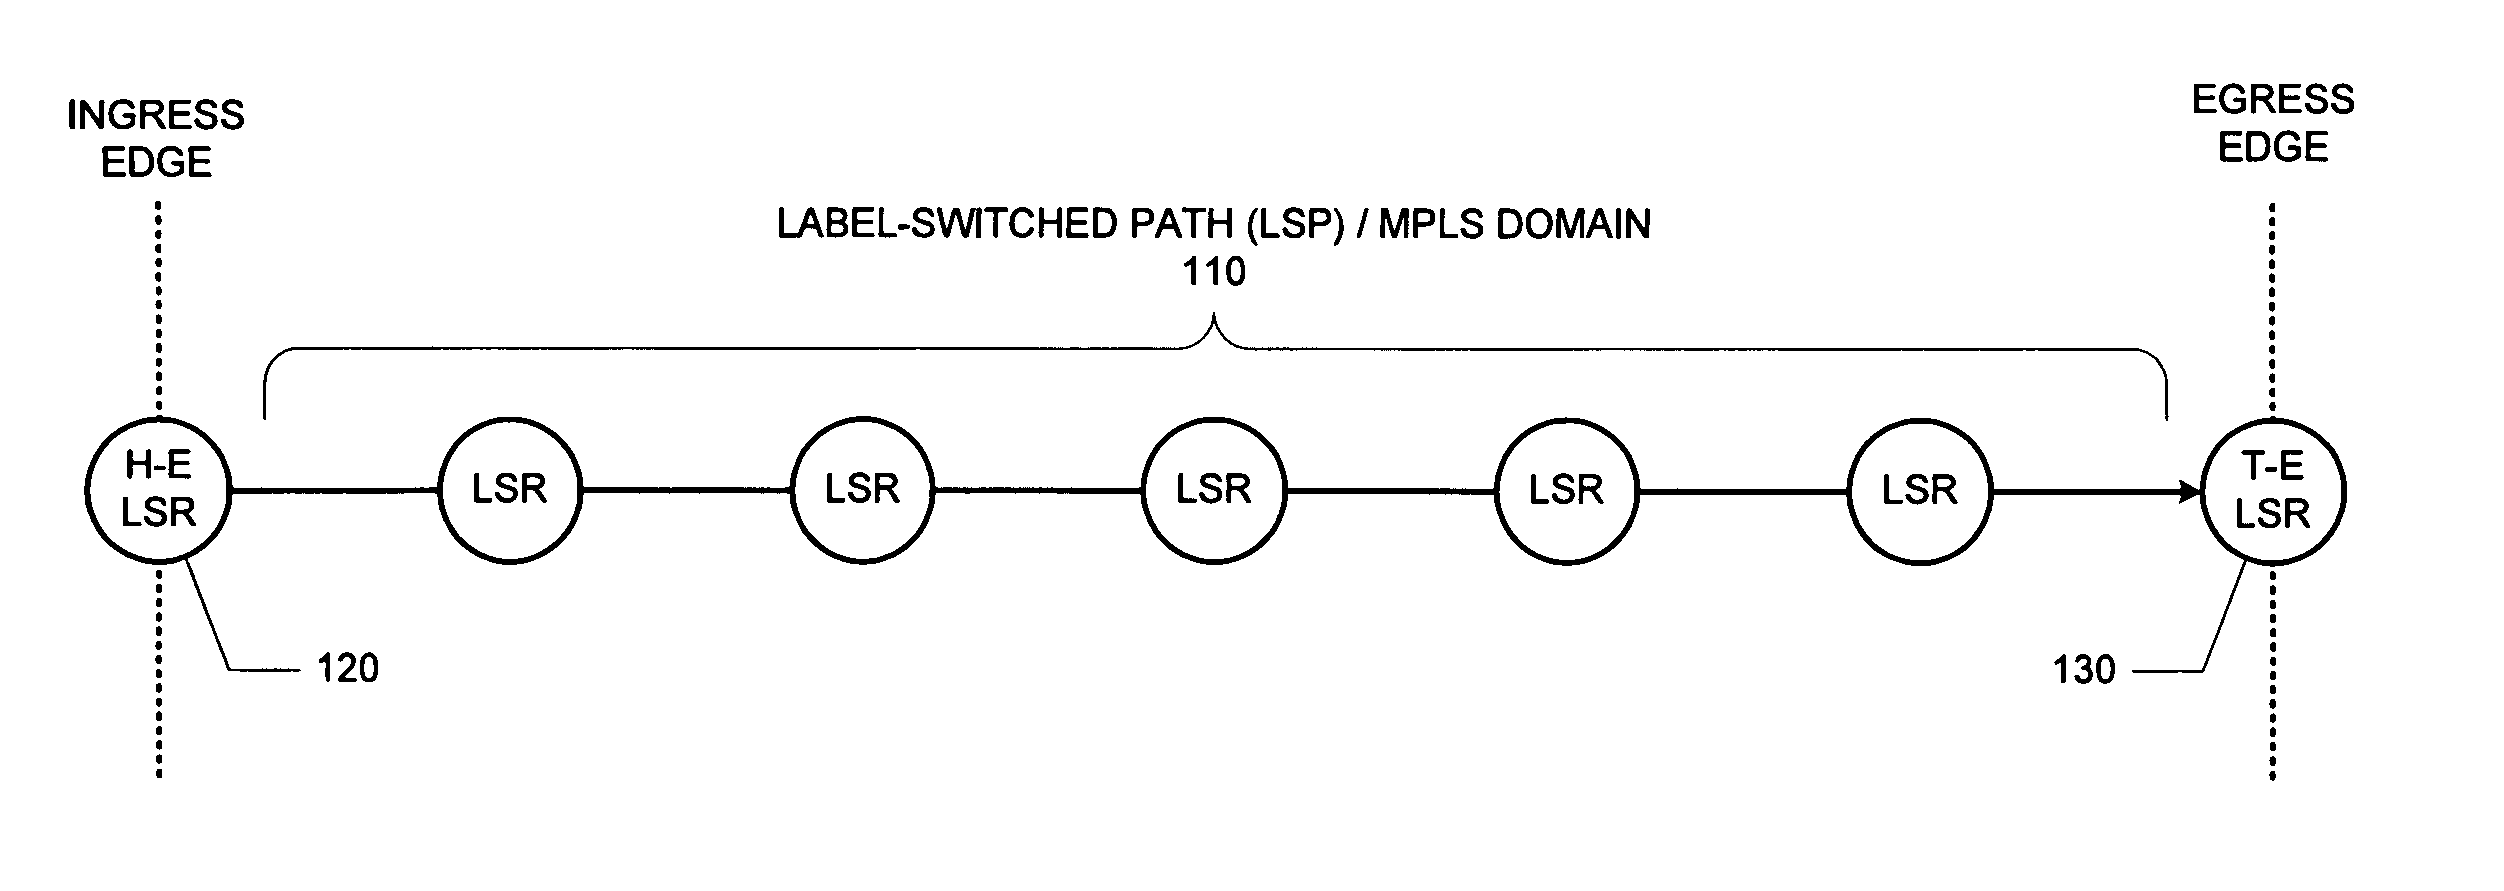 Graceful restart for use in nodes employing label switched path signaling protocols